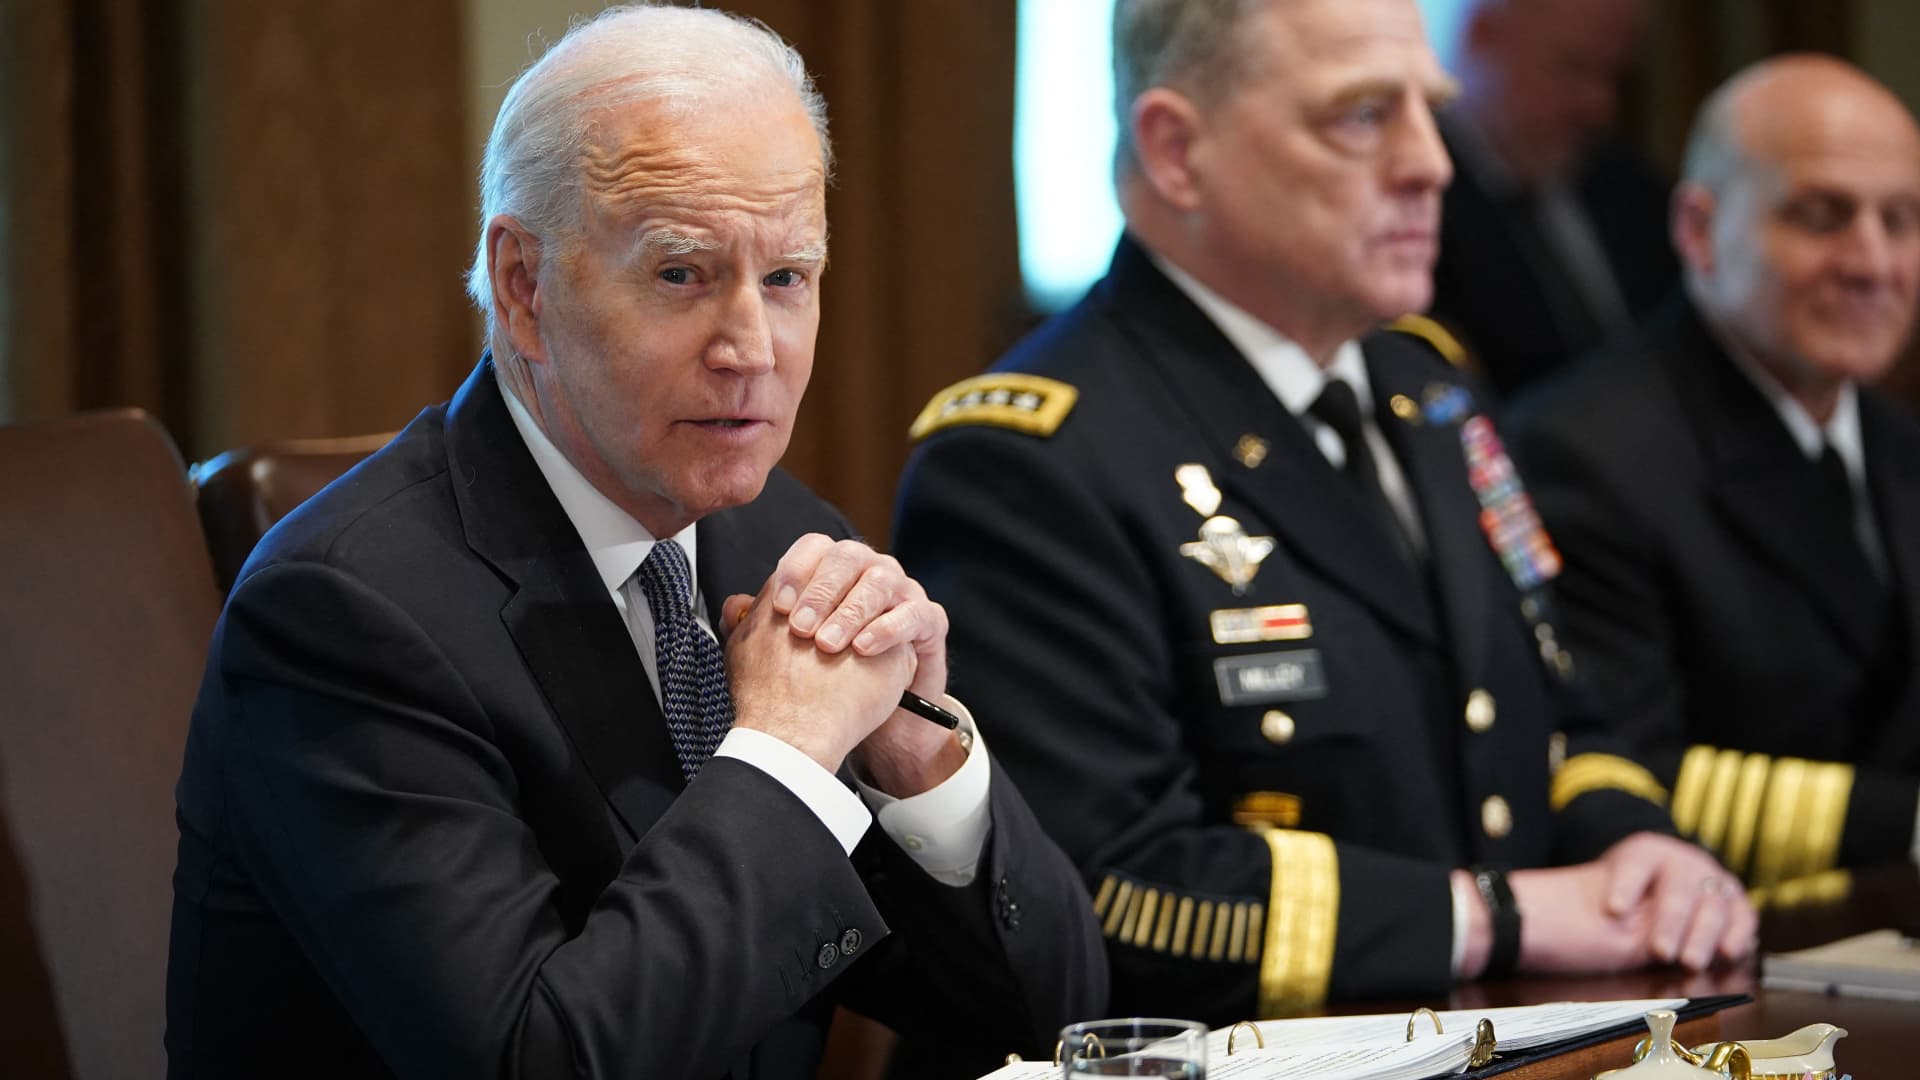 US President Joe Biden (L) meets with Defense Secretary Lloyd Austin, Deputy Defense Secretary Kathleen Hicks, Chairman of the Joint Chiefs of Staff General Mark Milley, the Joint Chiefs of Staff and Combatant Commanders in the Cabinet Room of the White House in Washington, DC on April 20, 2022.